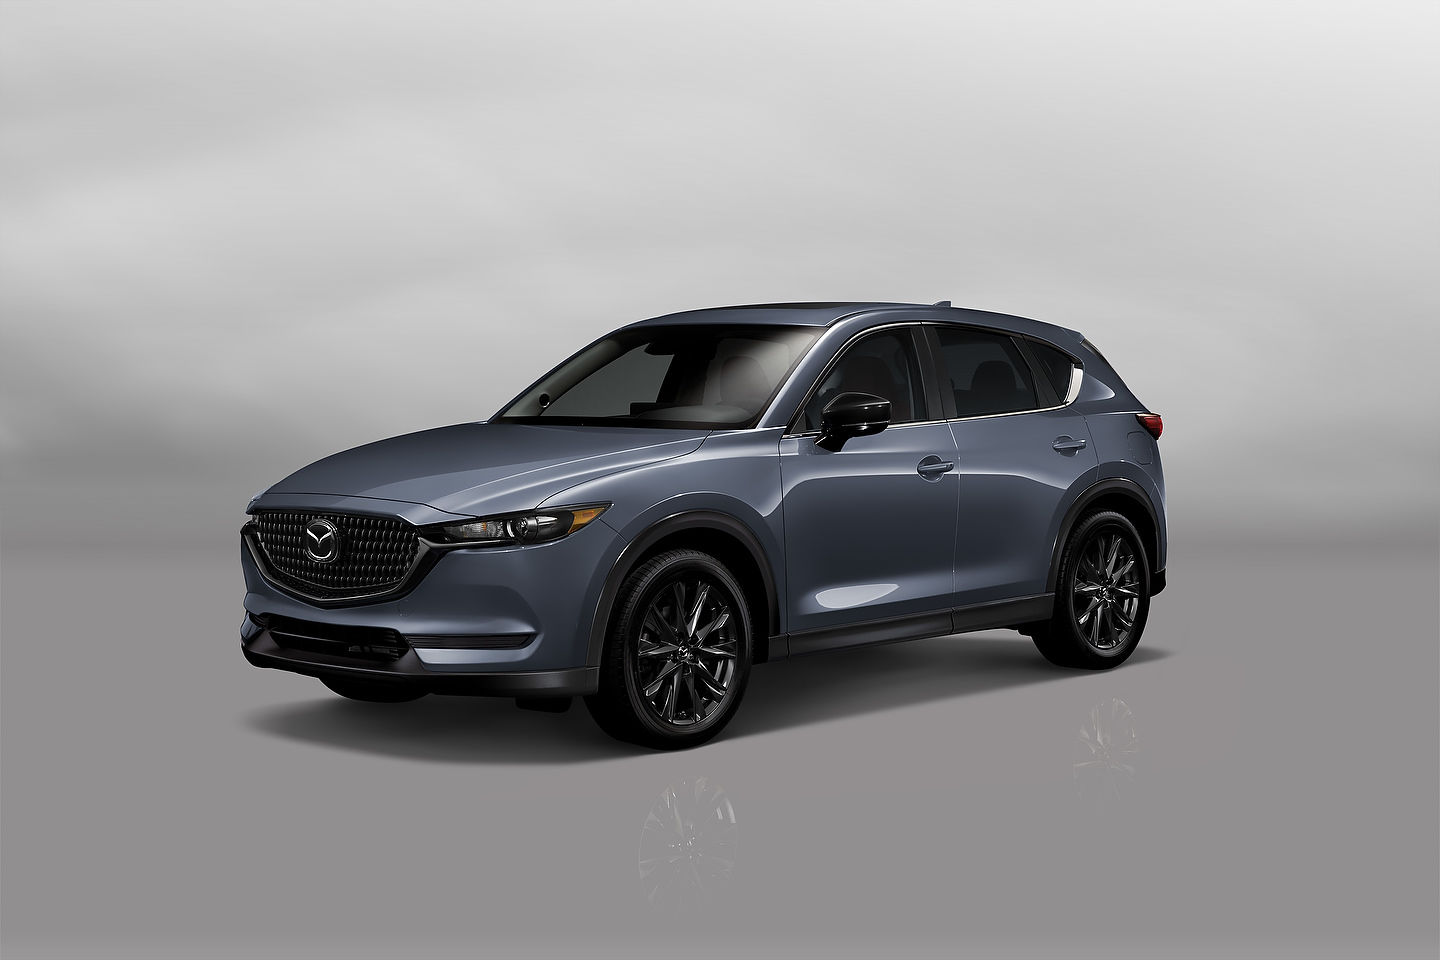 2021 Mazda CX-5 Versions and Trims Overview